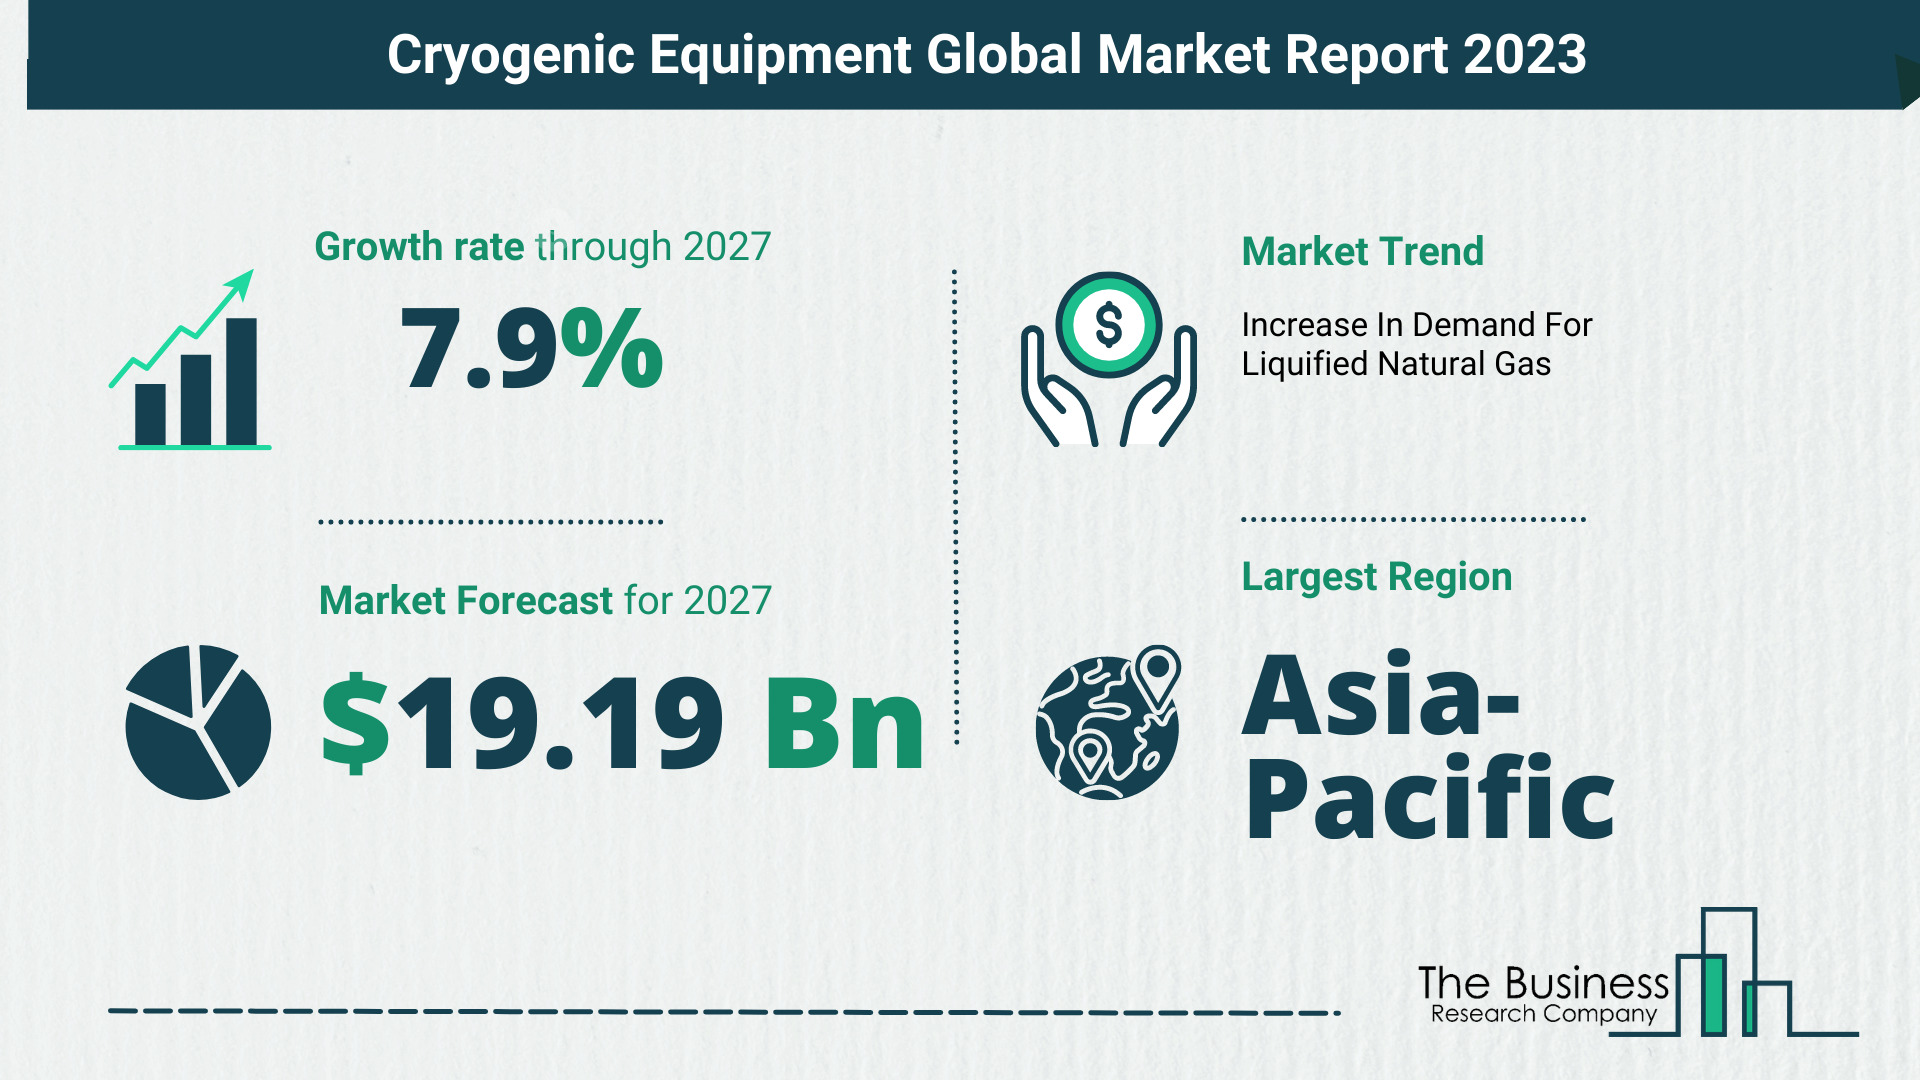 Cryogenic Equipment Market Overview: Market Size, Drivers And Trends